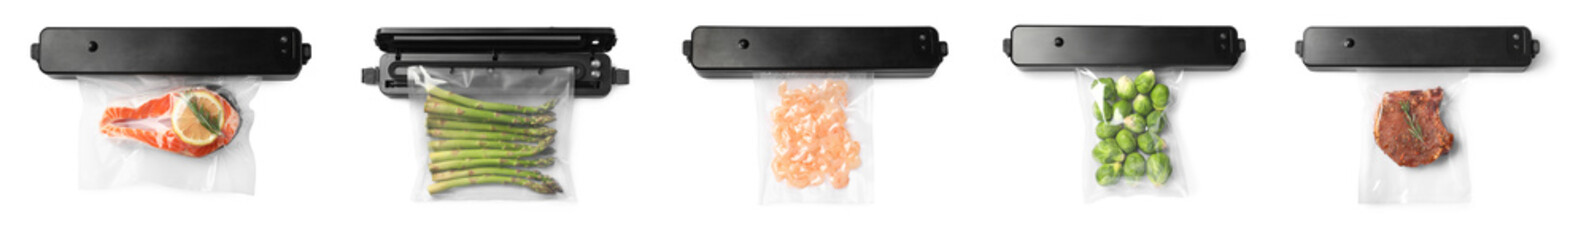 Set with sealer for vacuum packing, plastic bags and different products on white background, top...